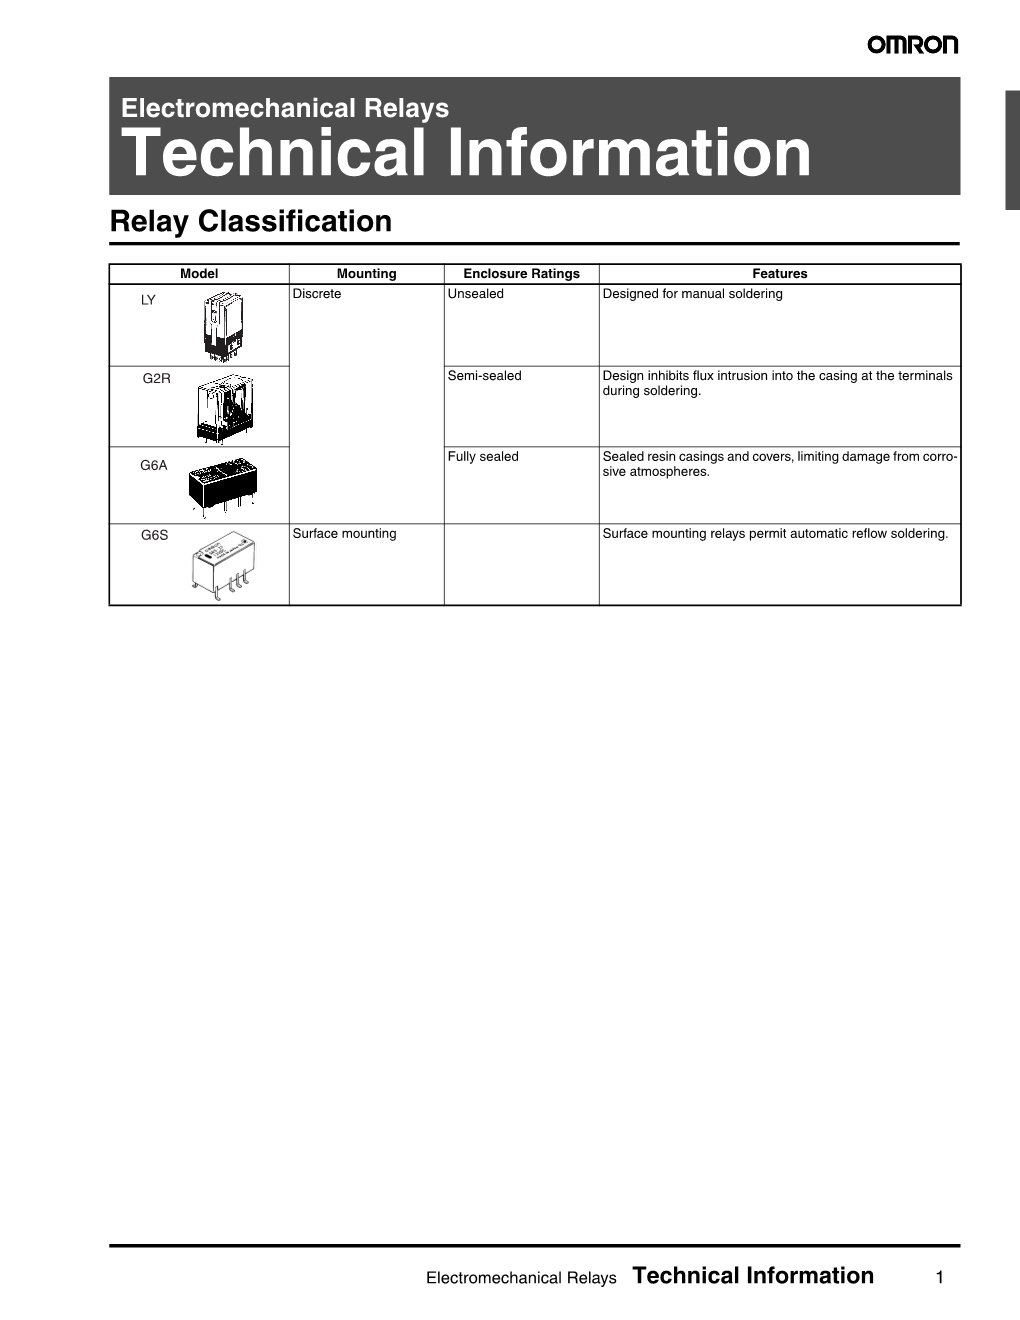 Electromechanical Relays Technical Information Relay Classification